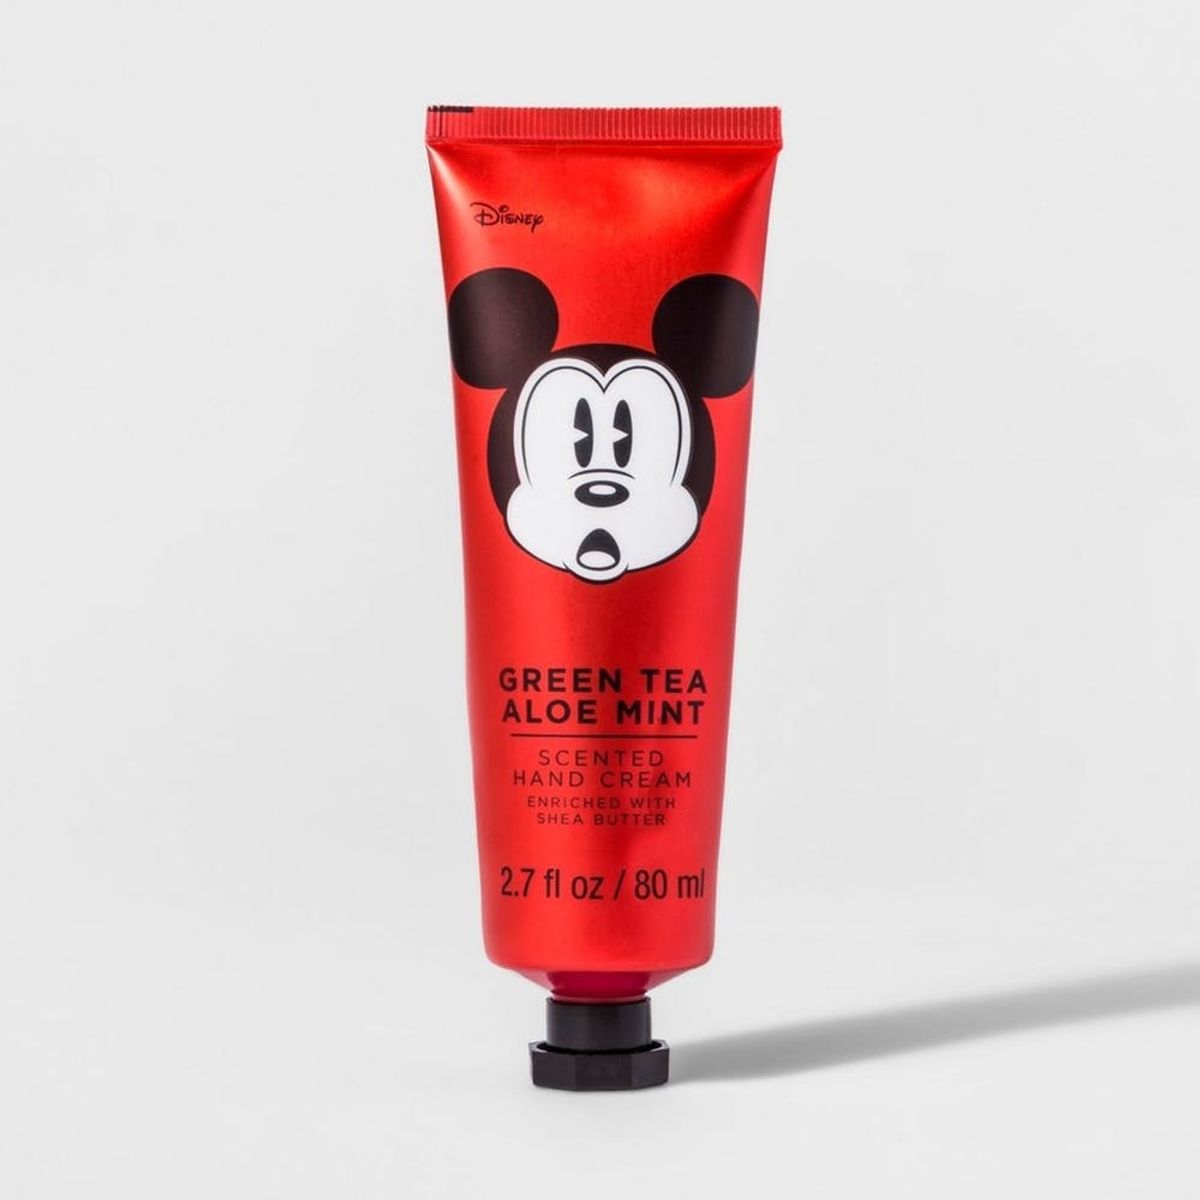 Target Now Has a Disney Beauty Collection & You’ll Want It All